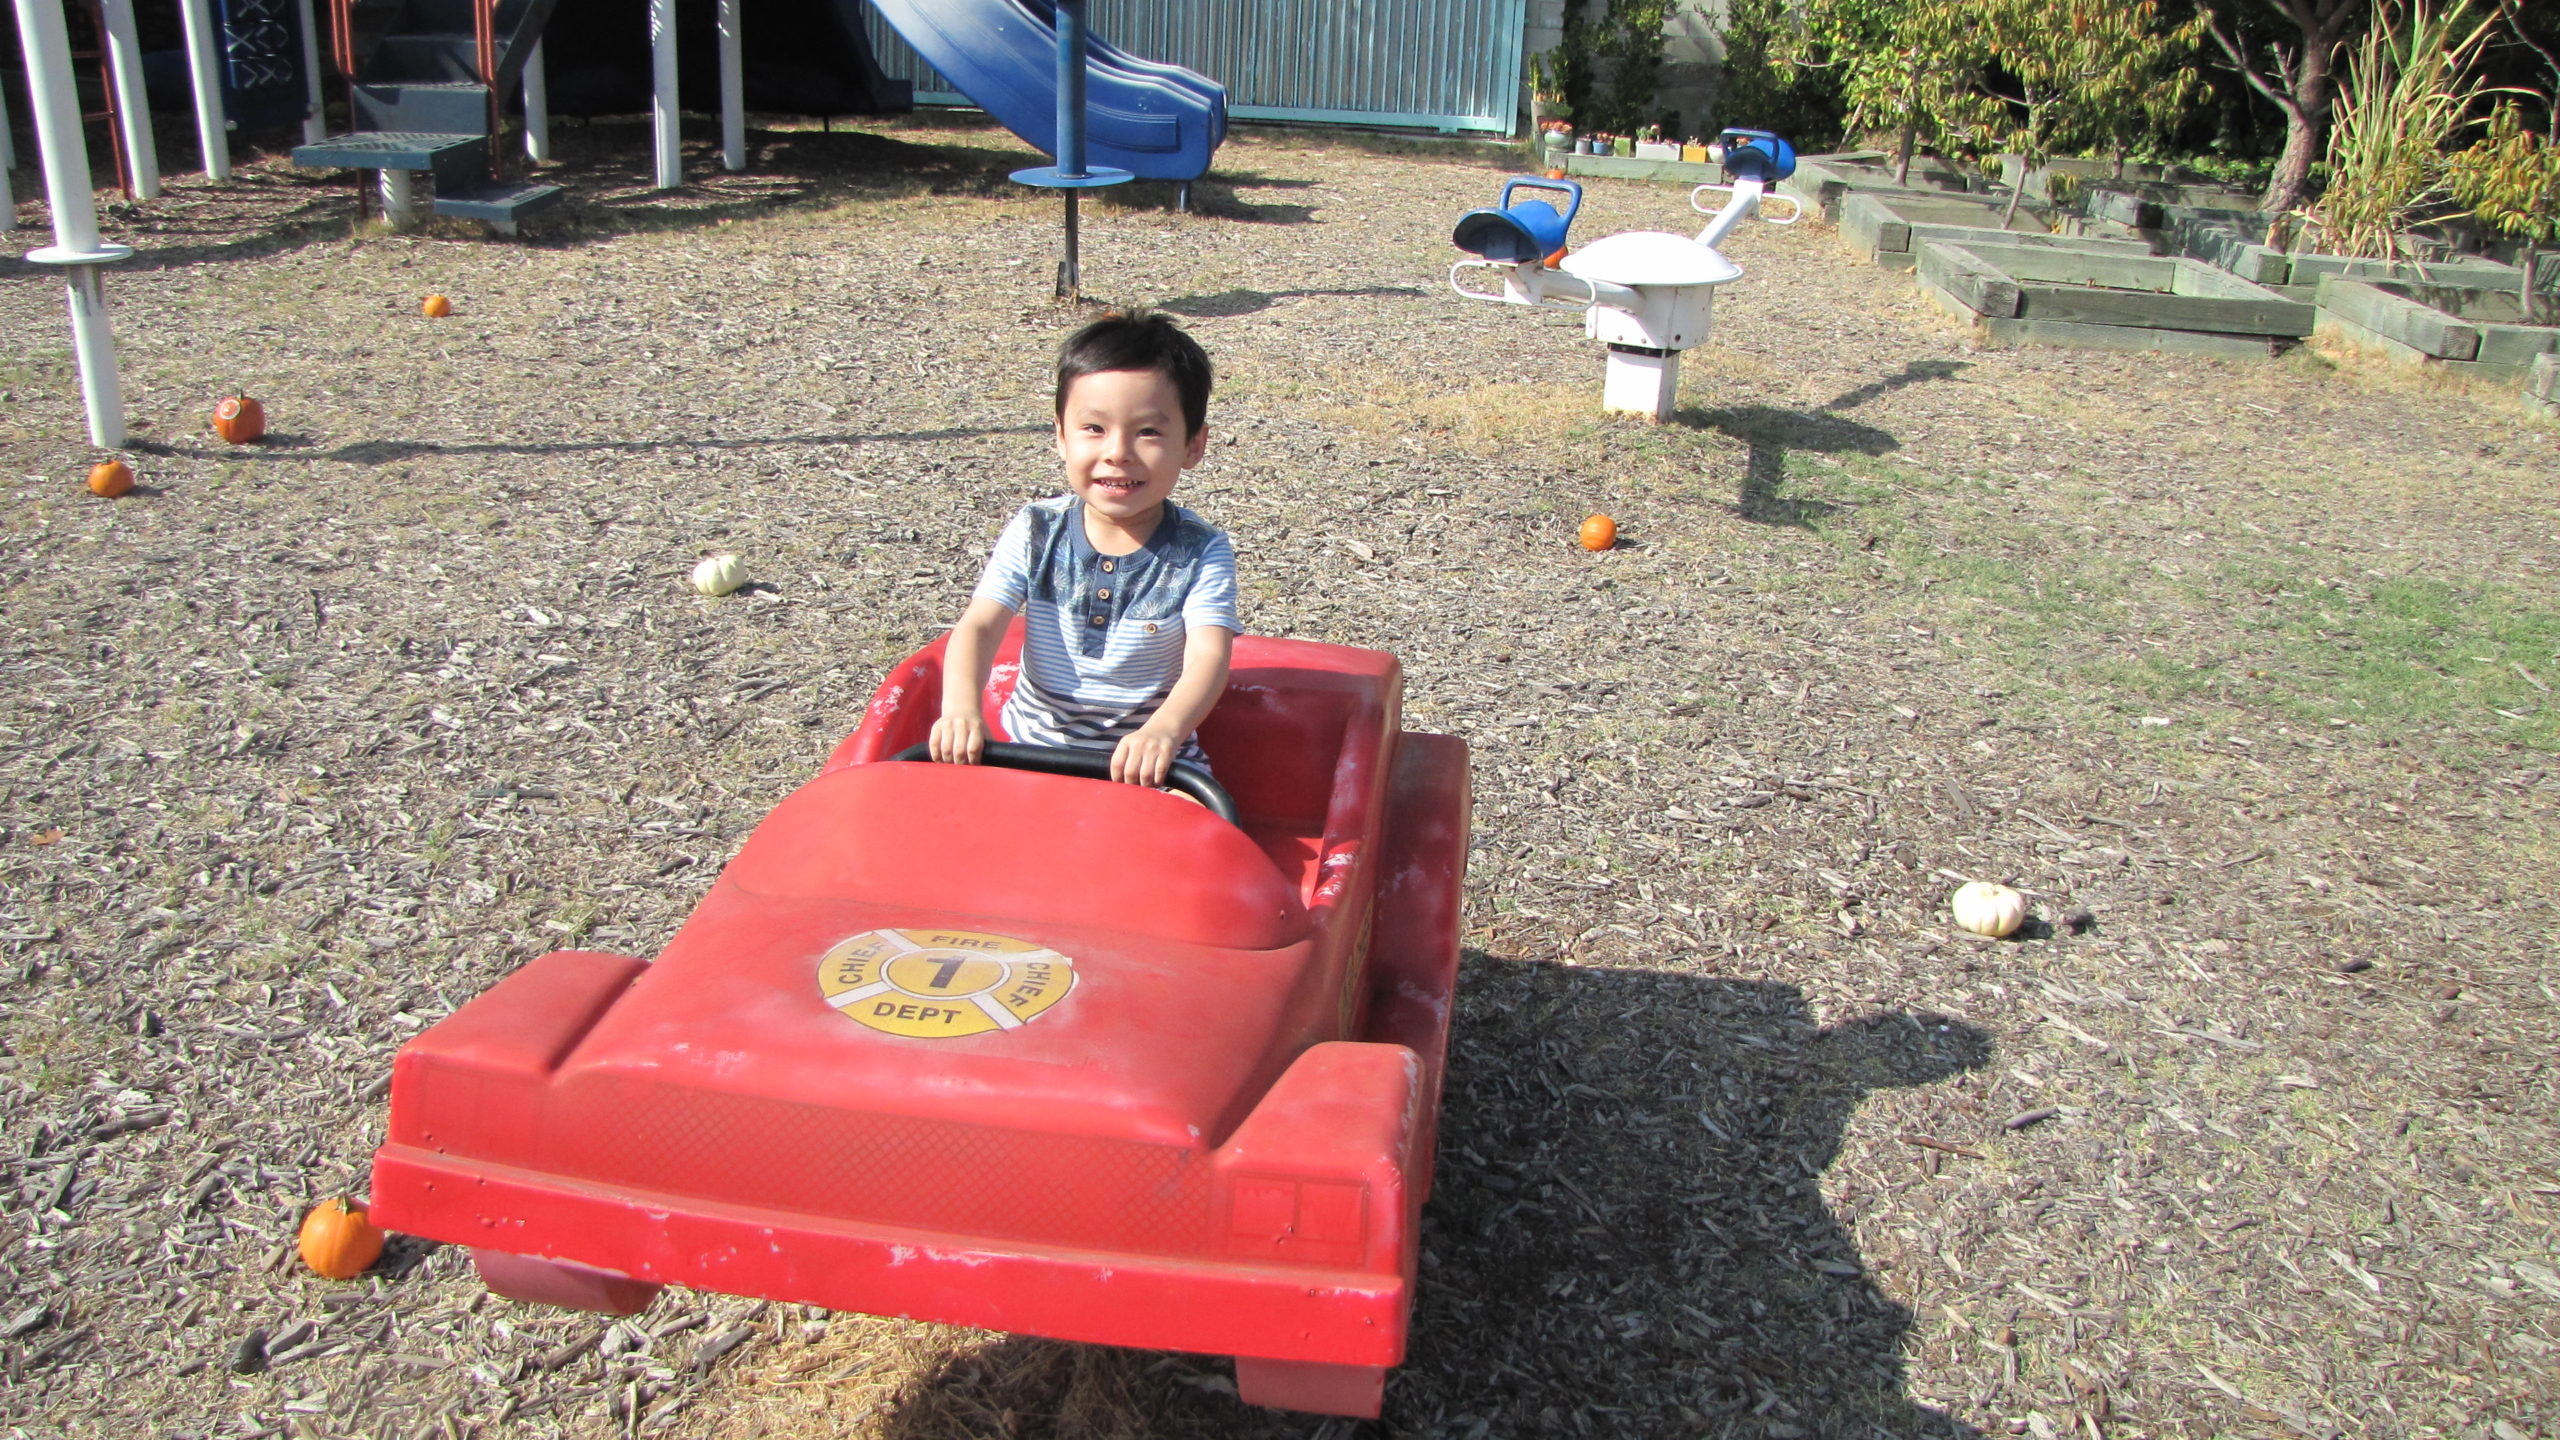 A young boy in a red car at a playground.